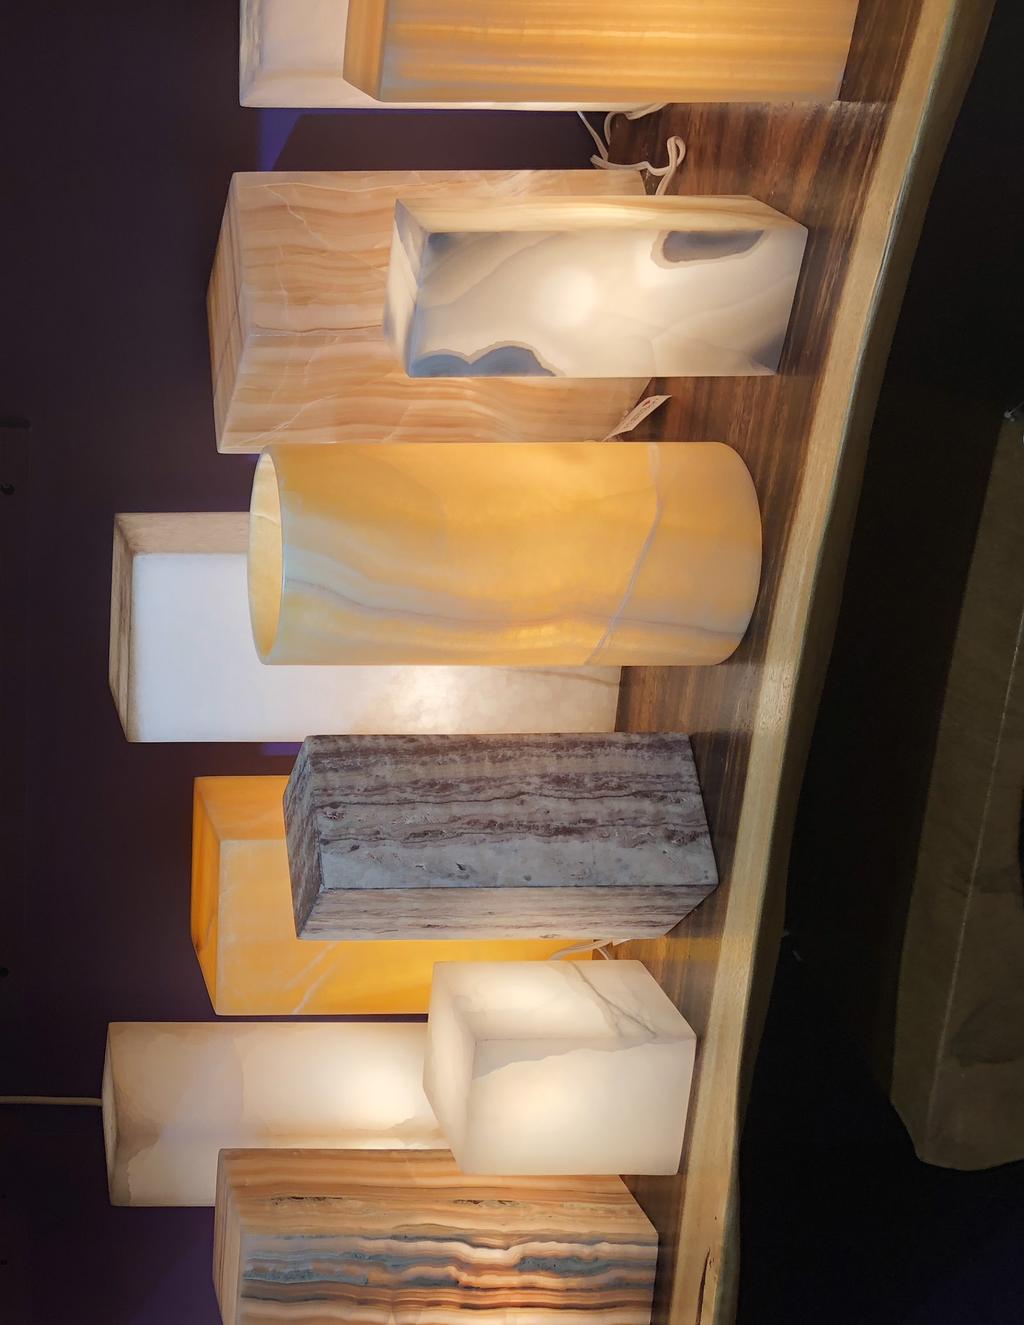 ONYX LAMPS Wide range of sizes and styles Onyx is sliced thin so it is